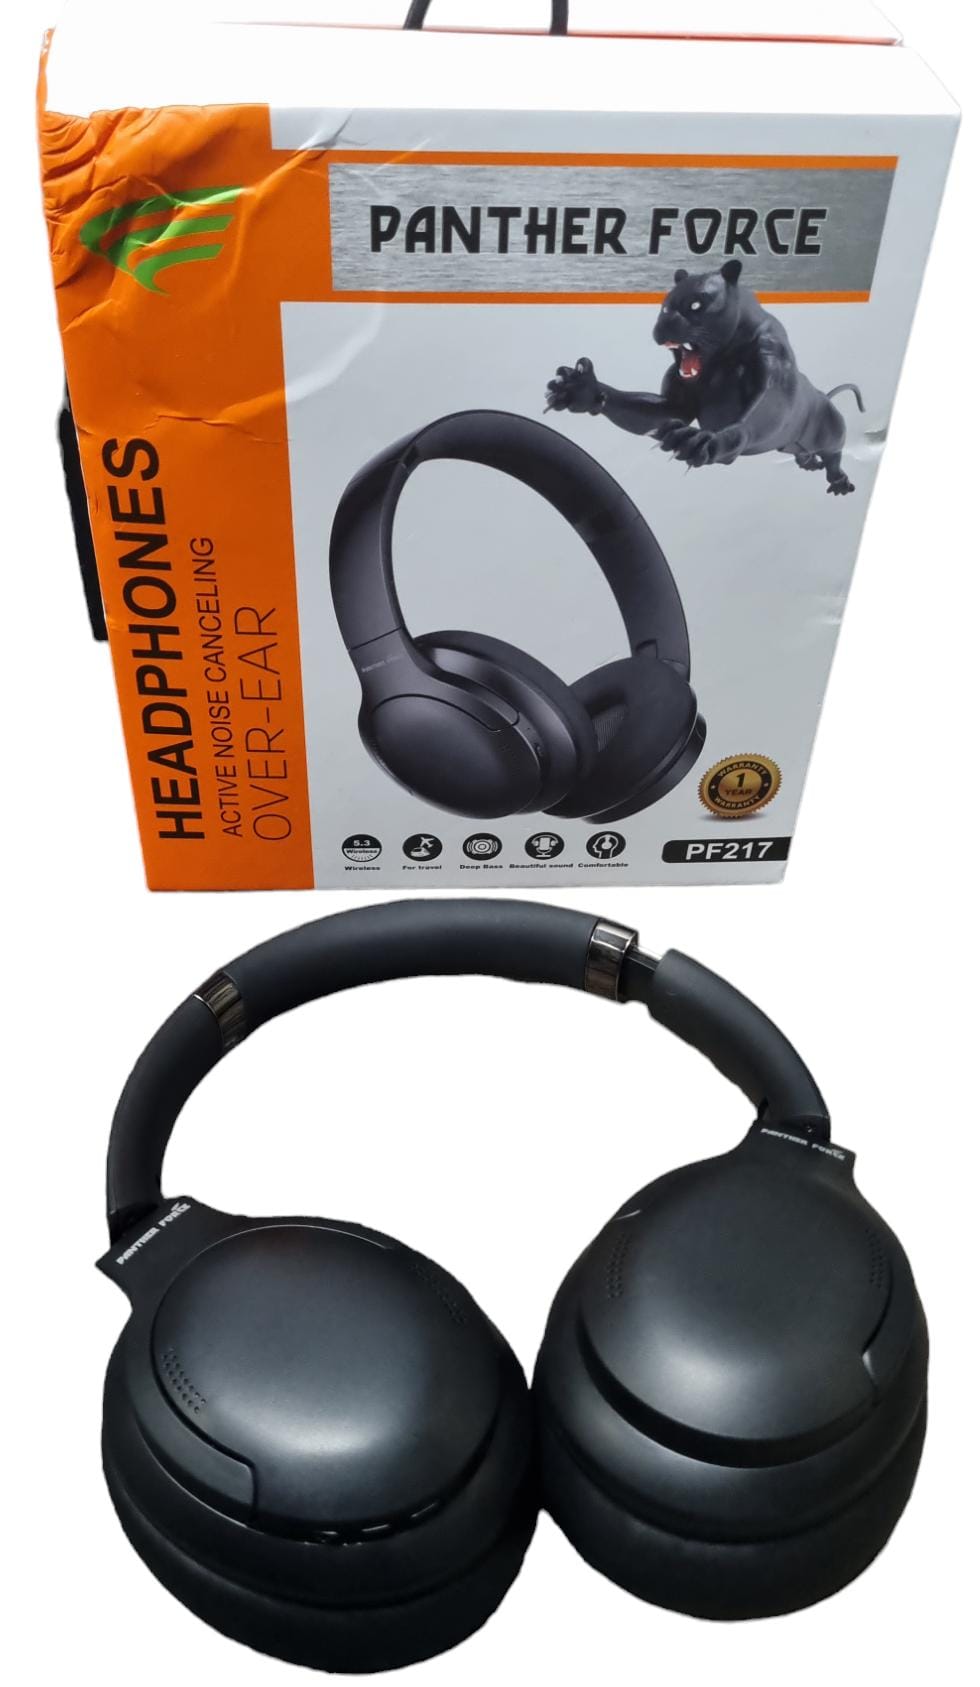 Panther Force - Headphones - ANC Headphones - PF217 - Boxed